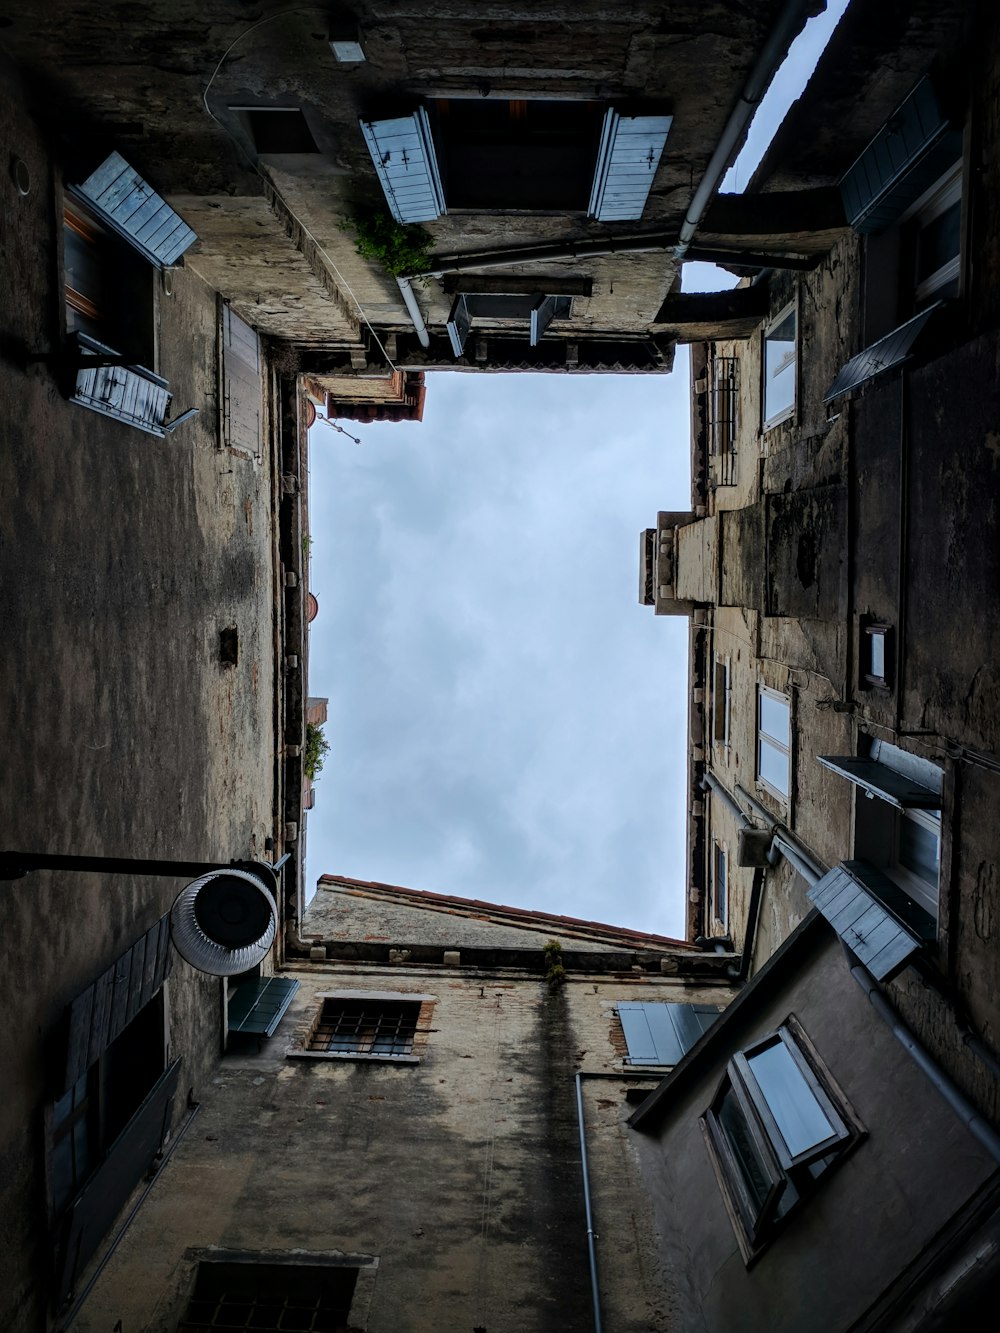 worm's eye view of a gray building